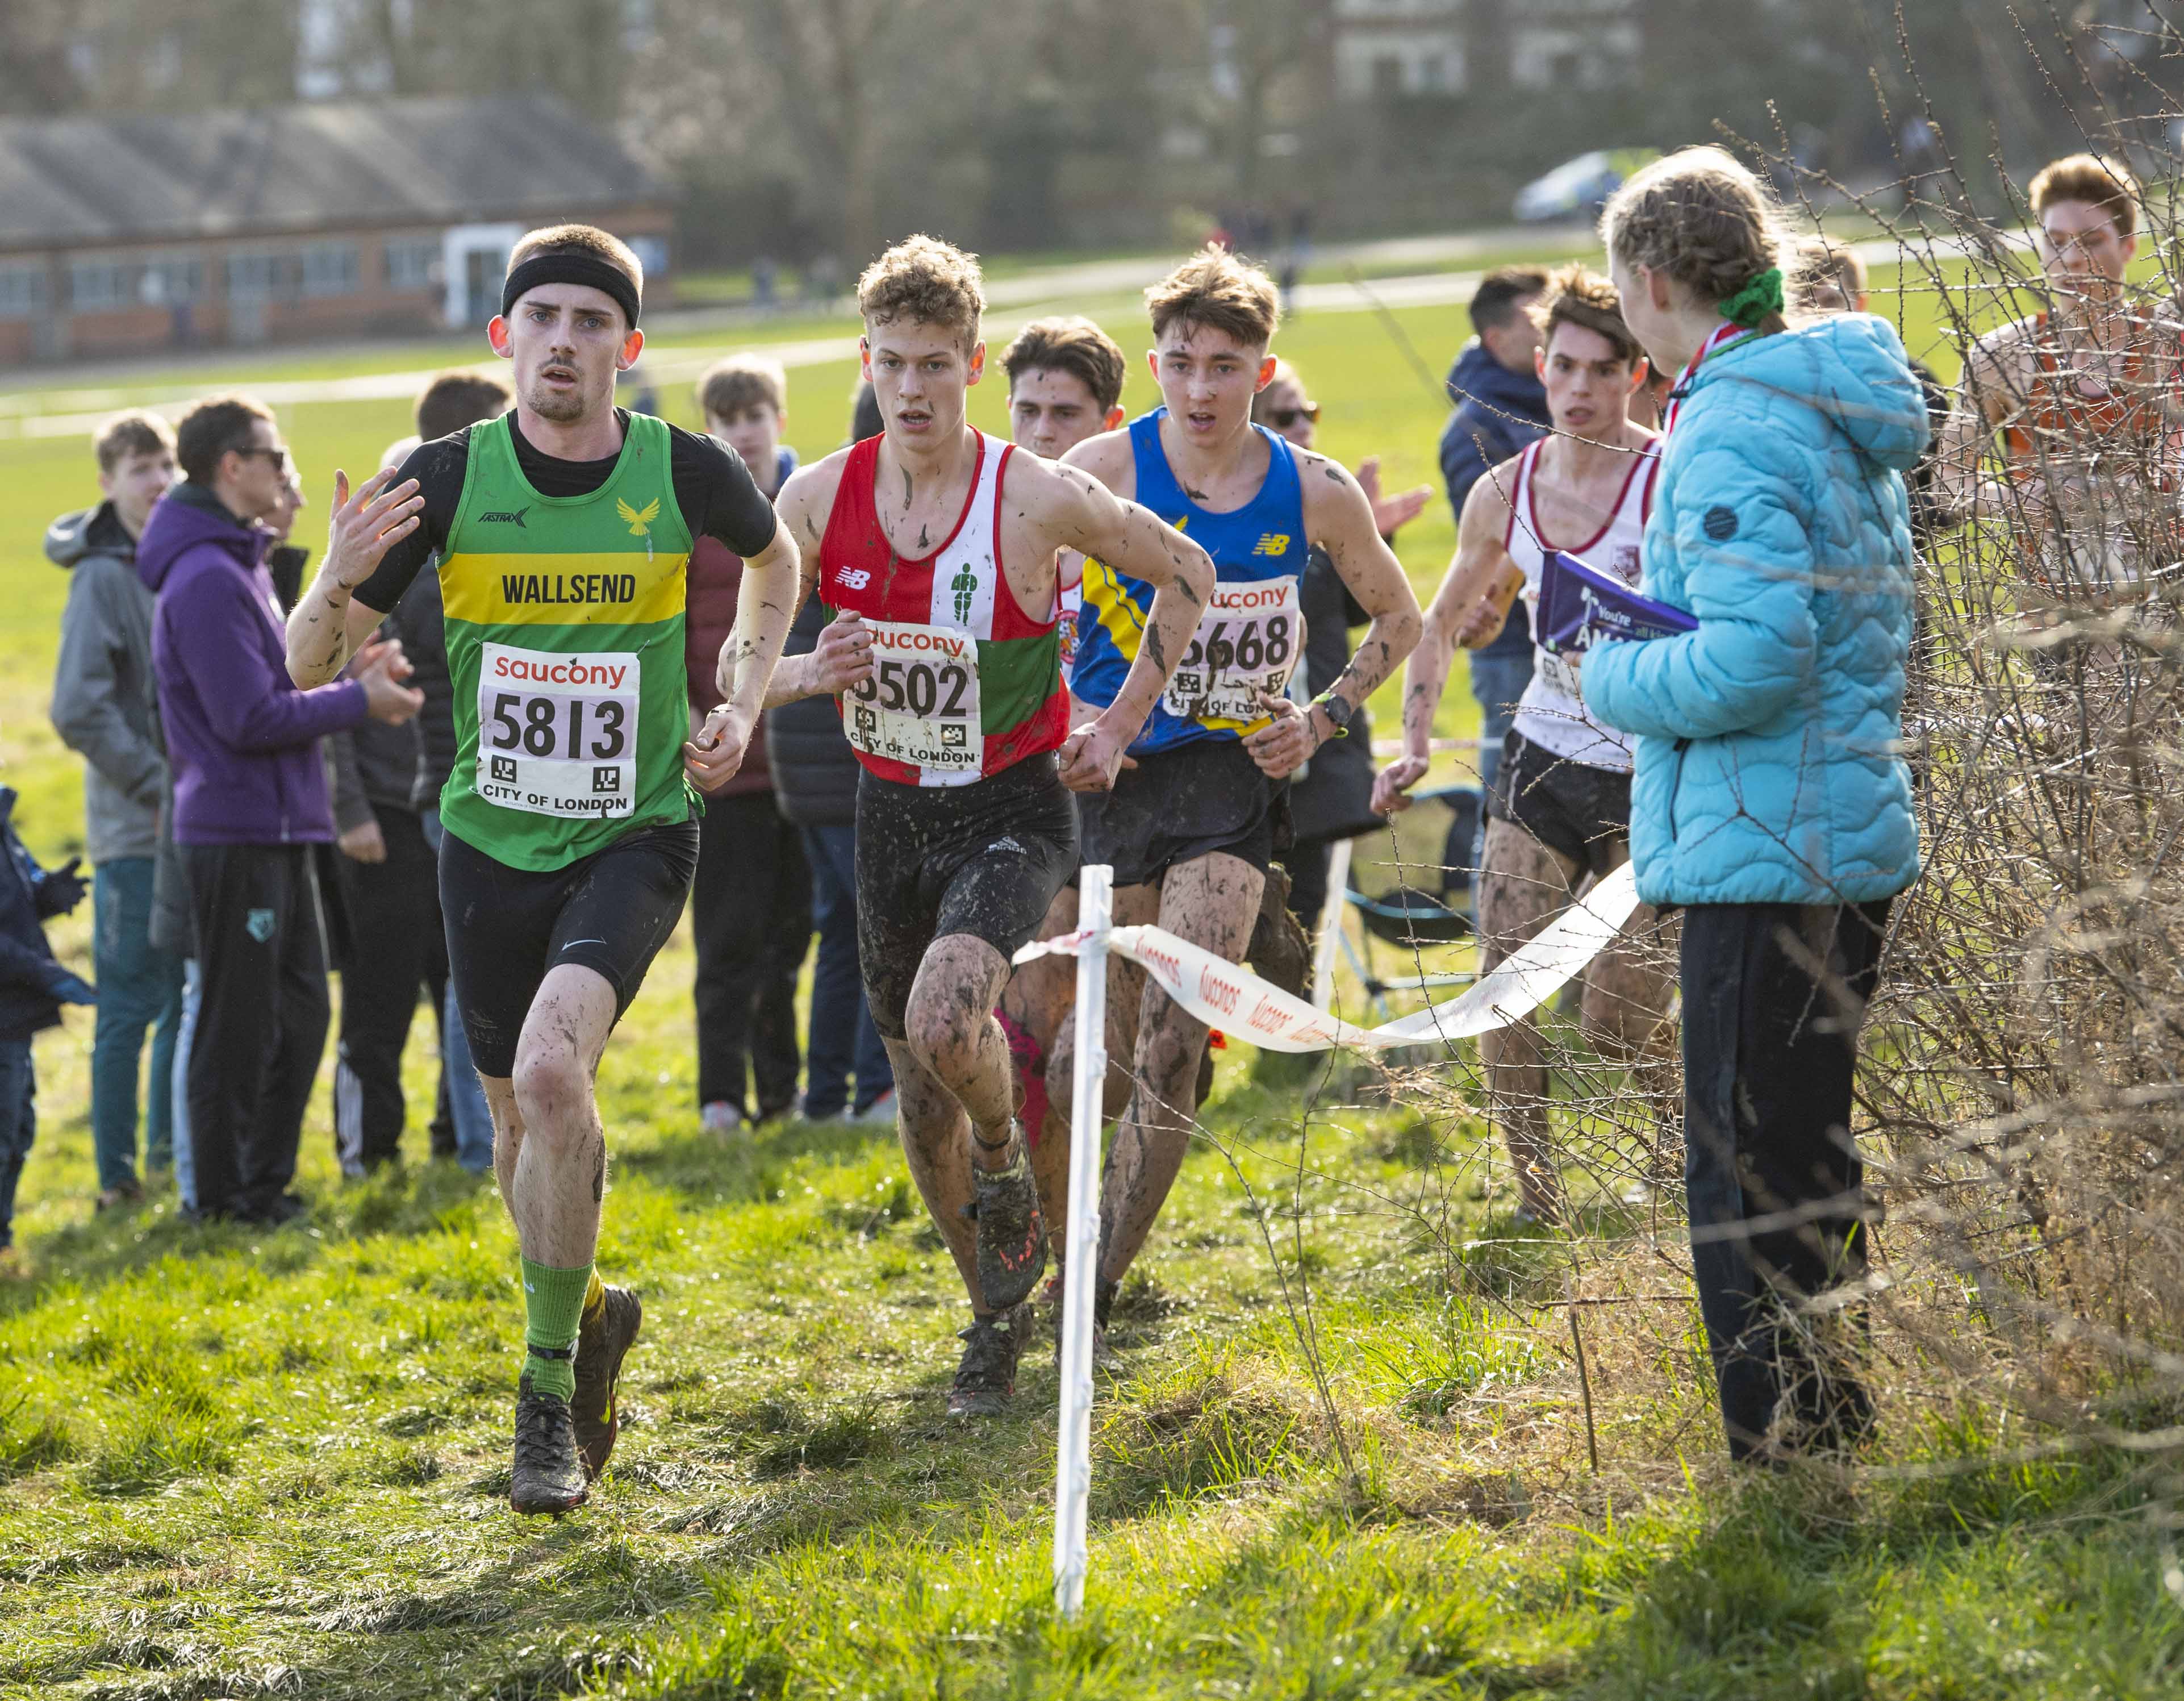 Gallery 2022 English National XC English Cross Country Association